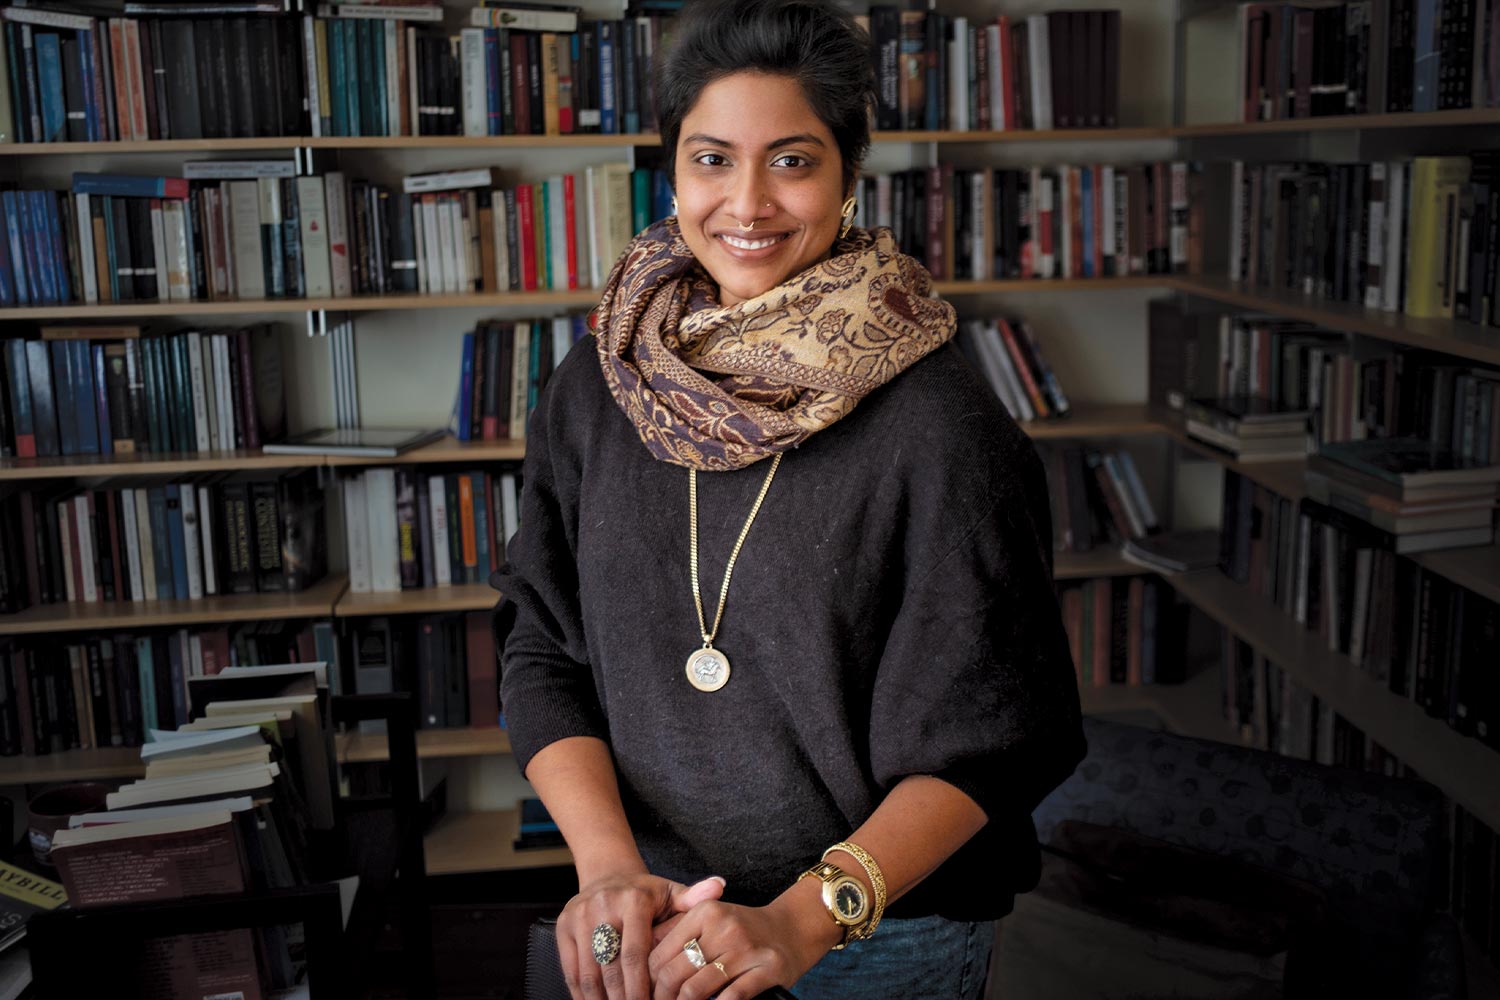 Headshot of Sabeen Ahmed in her office, surrounded by books. She wears a black shirt, beige patterned scarf and a bright gold medallion necklace.